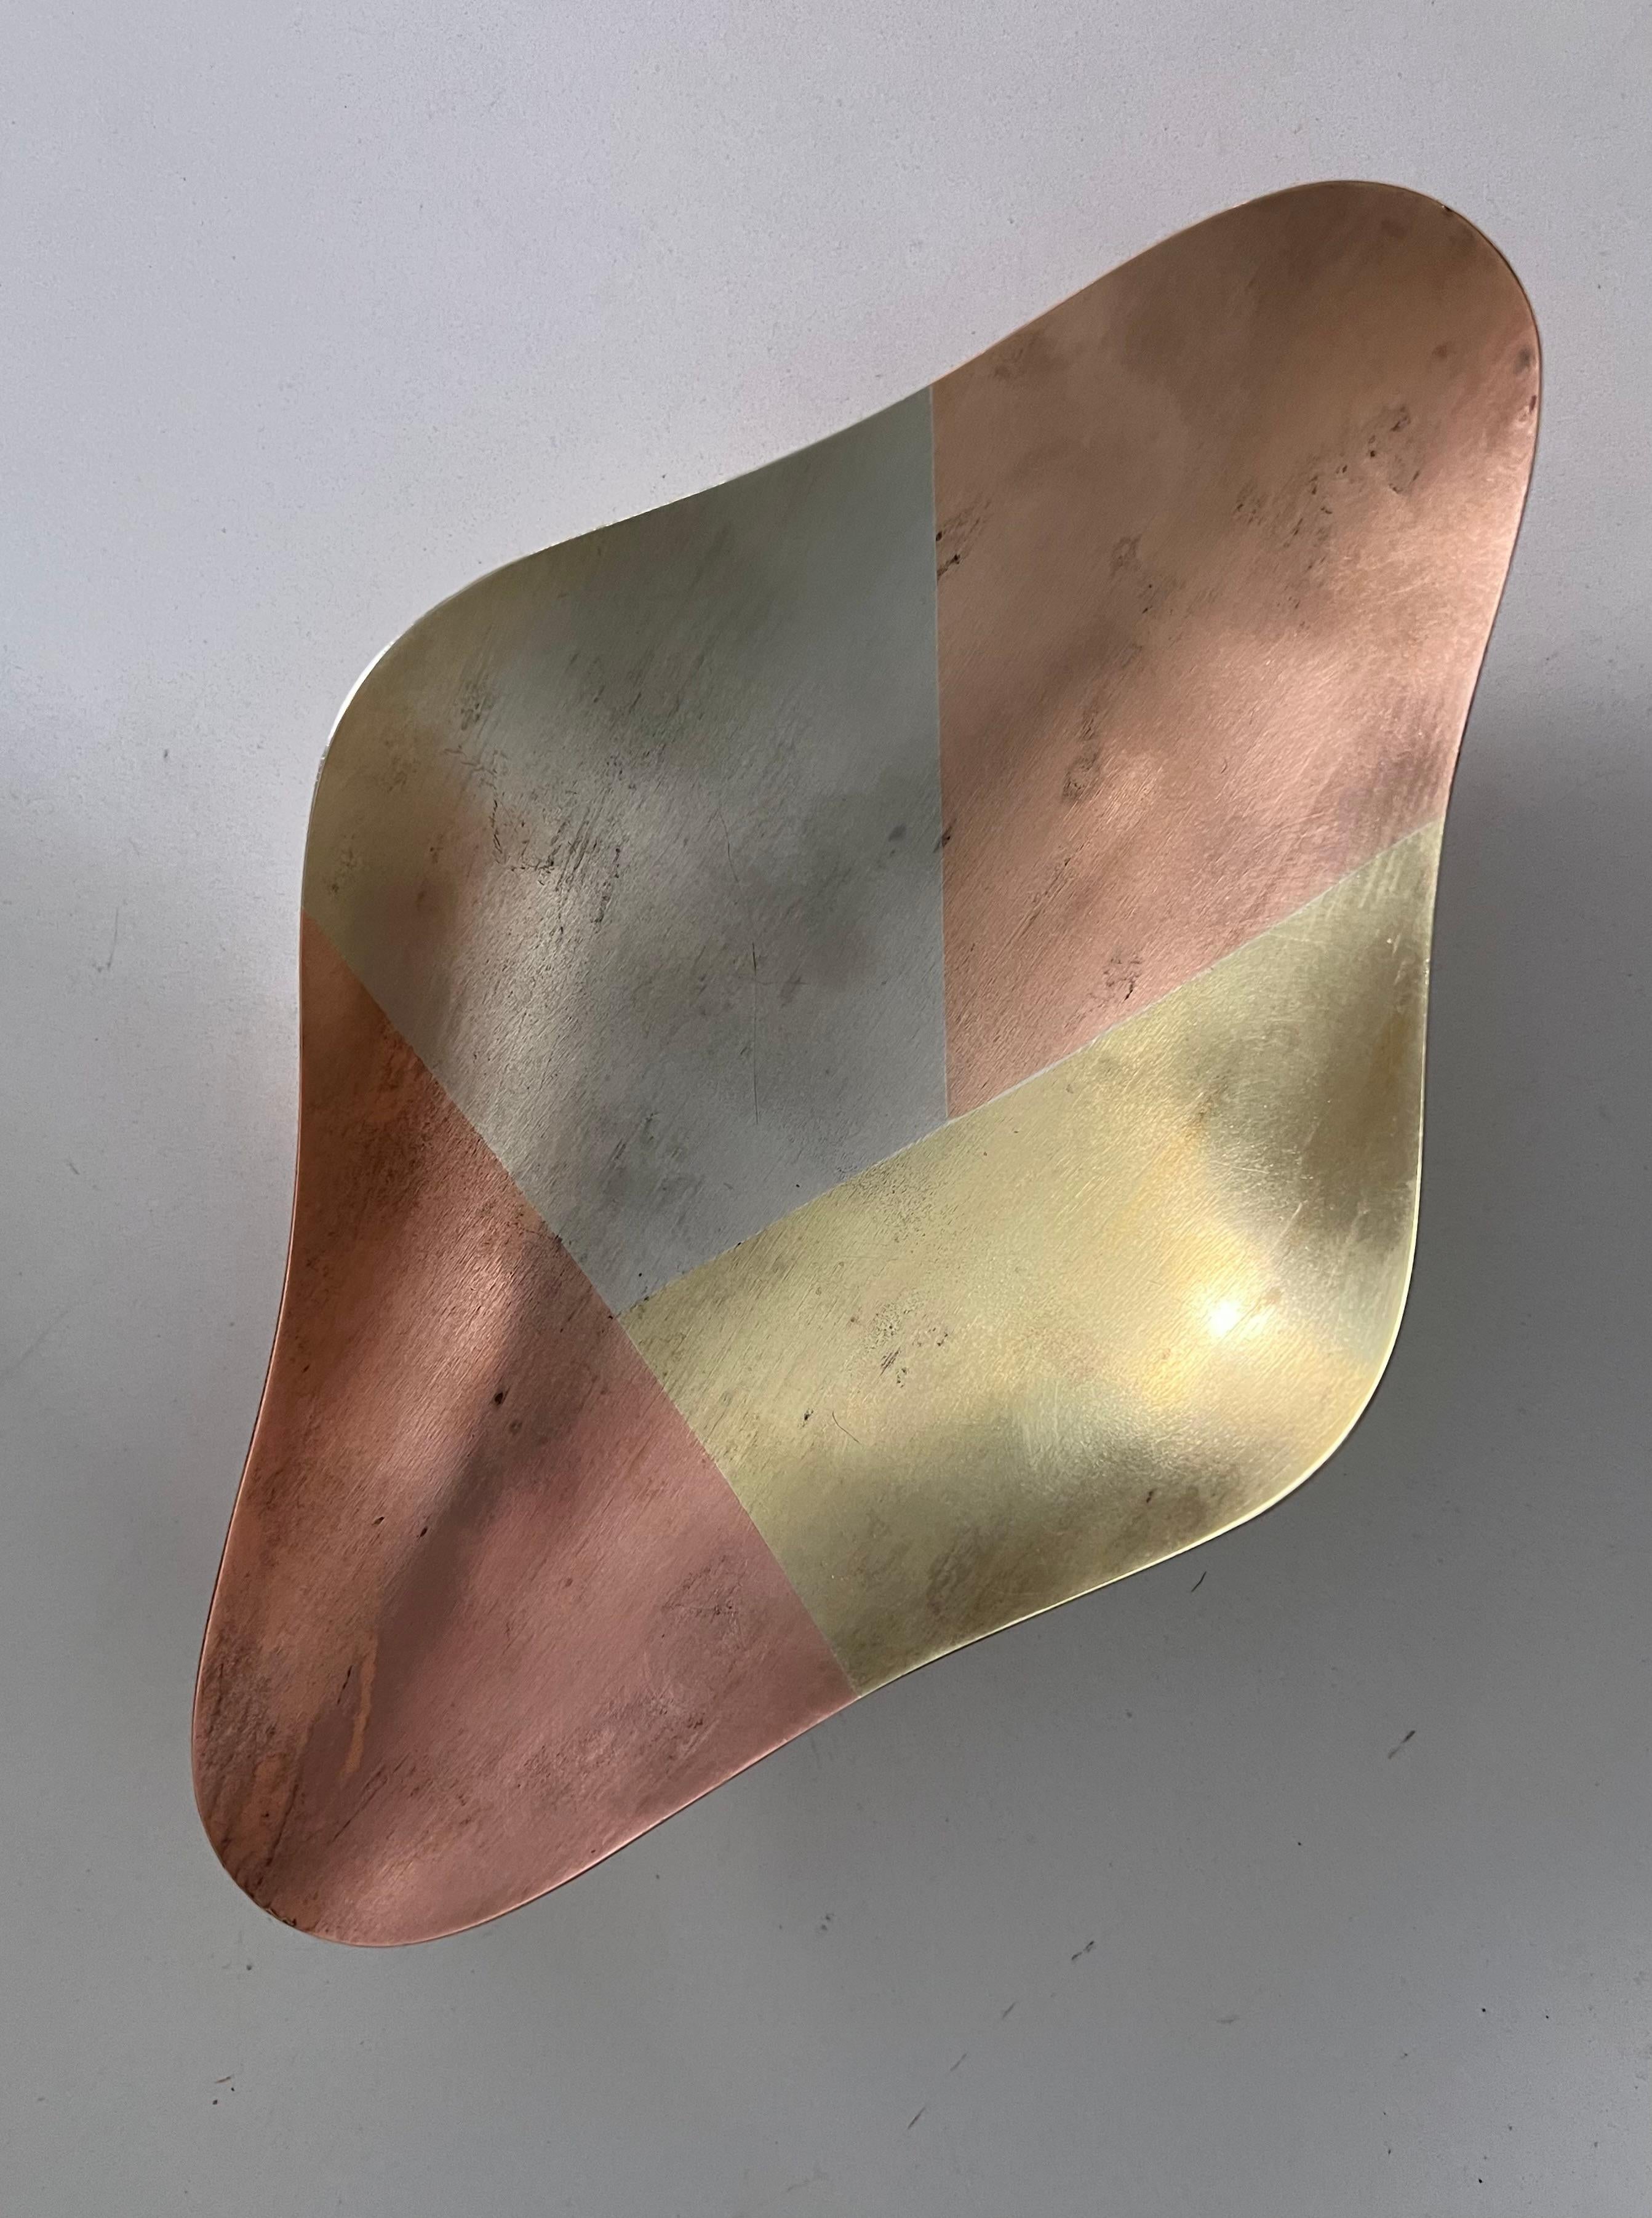 Multi-metal kaleidoscopic tray with charming patina. A gorgeous freeform shape with a slight concavity to draw its contents to center. 

Small round feet give this piece height and stability. A compliment to any entry table or vanity. Great for